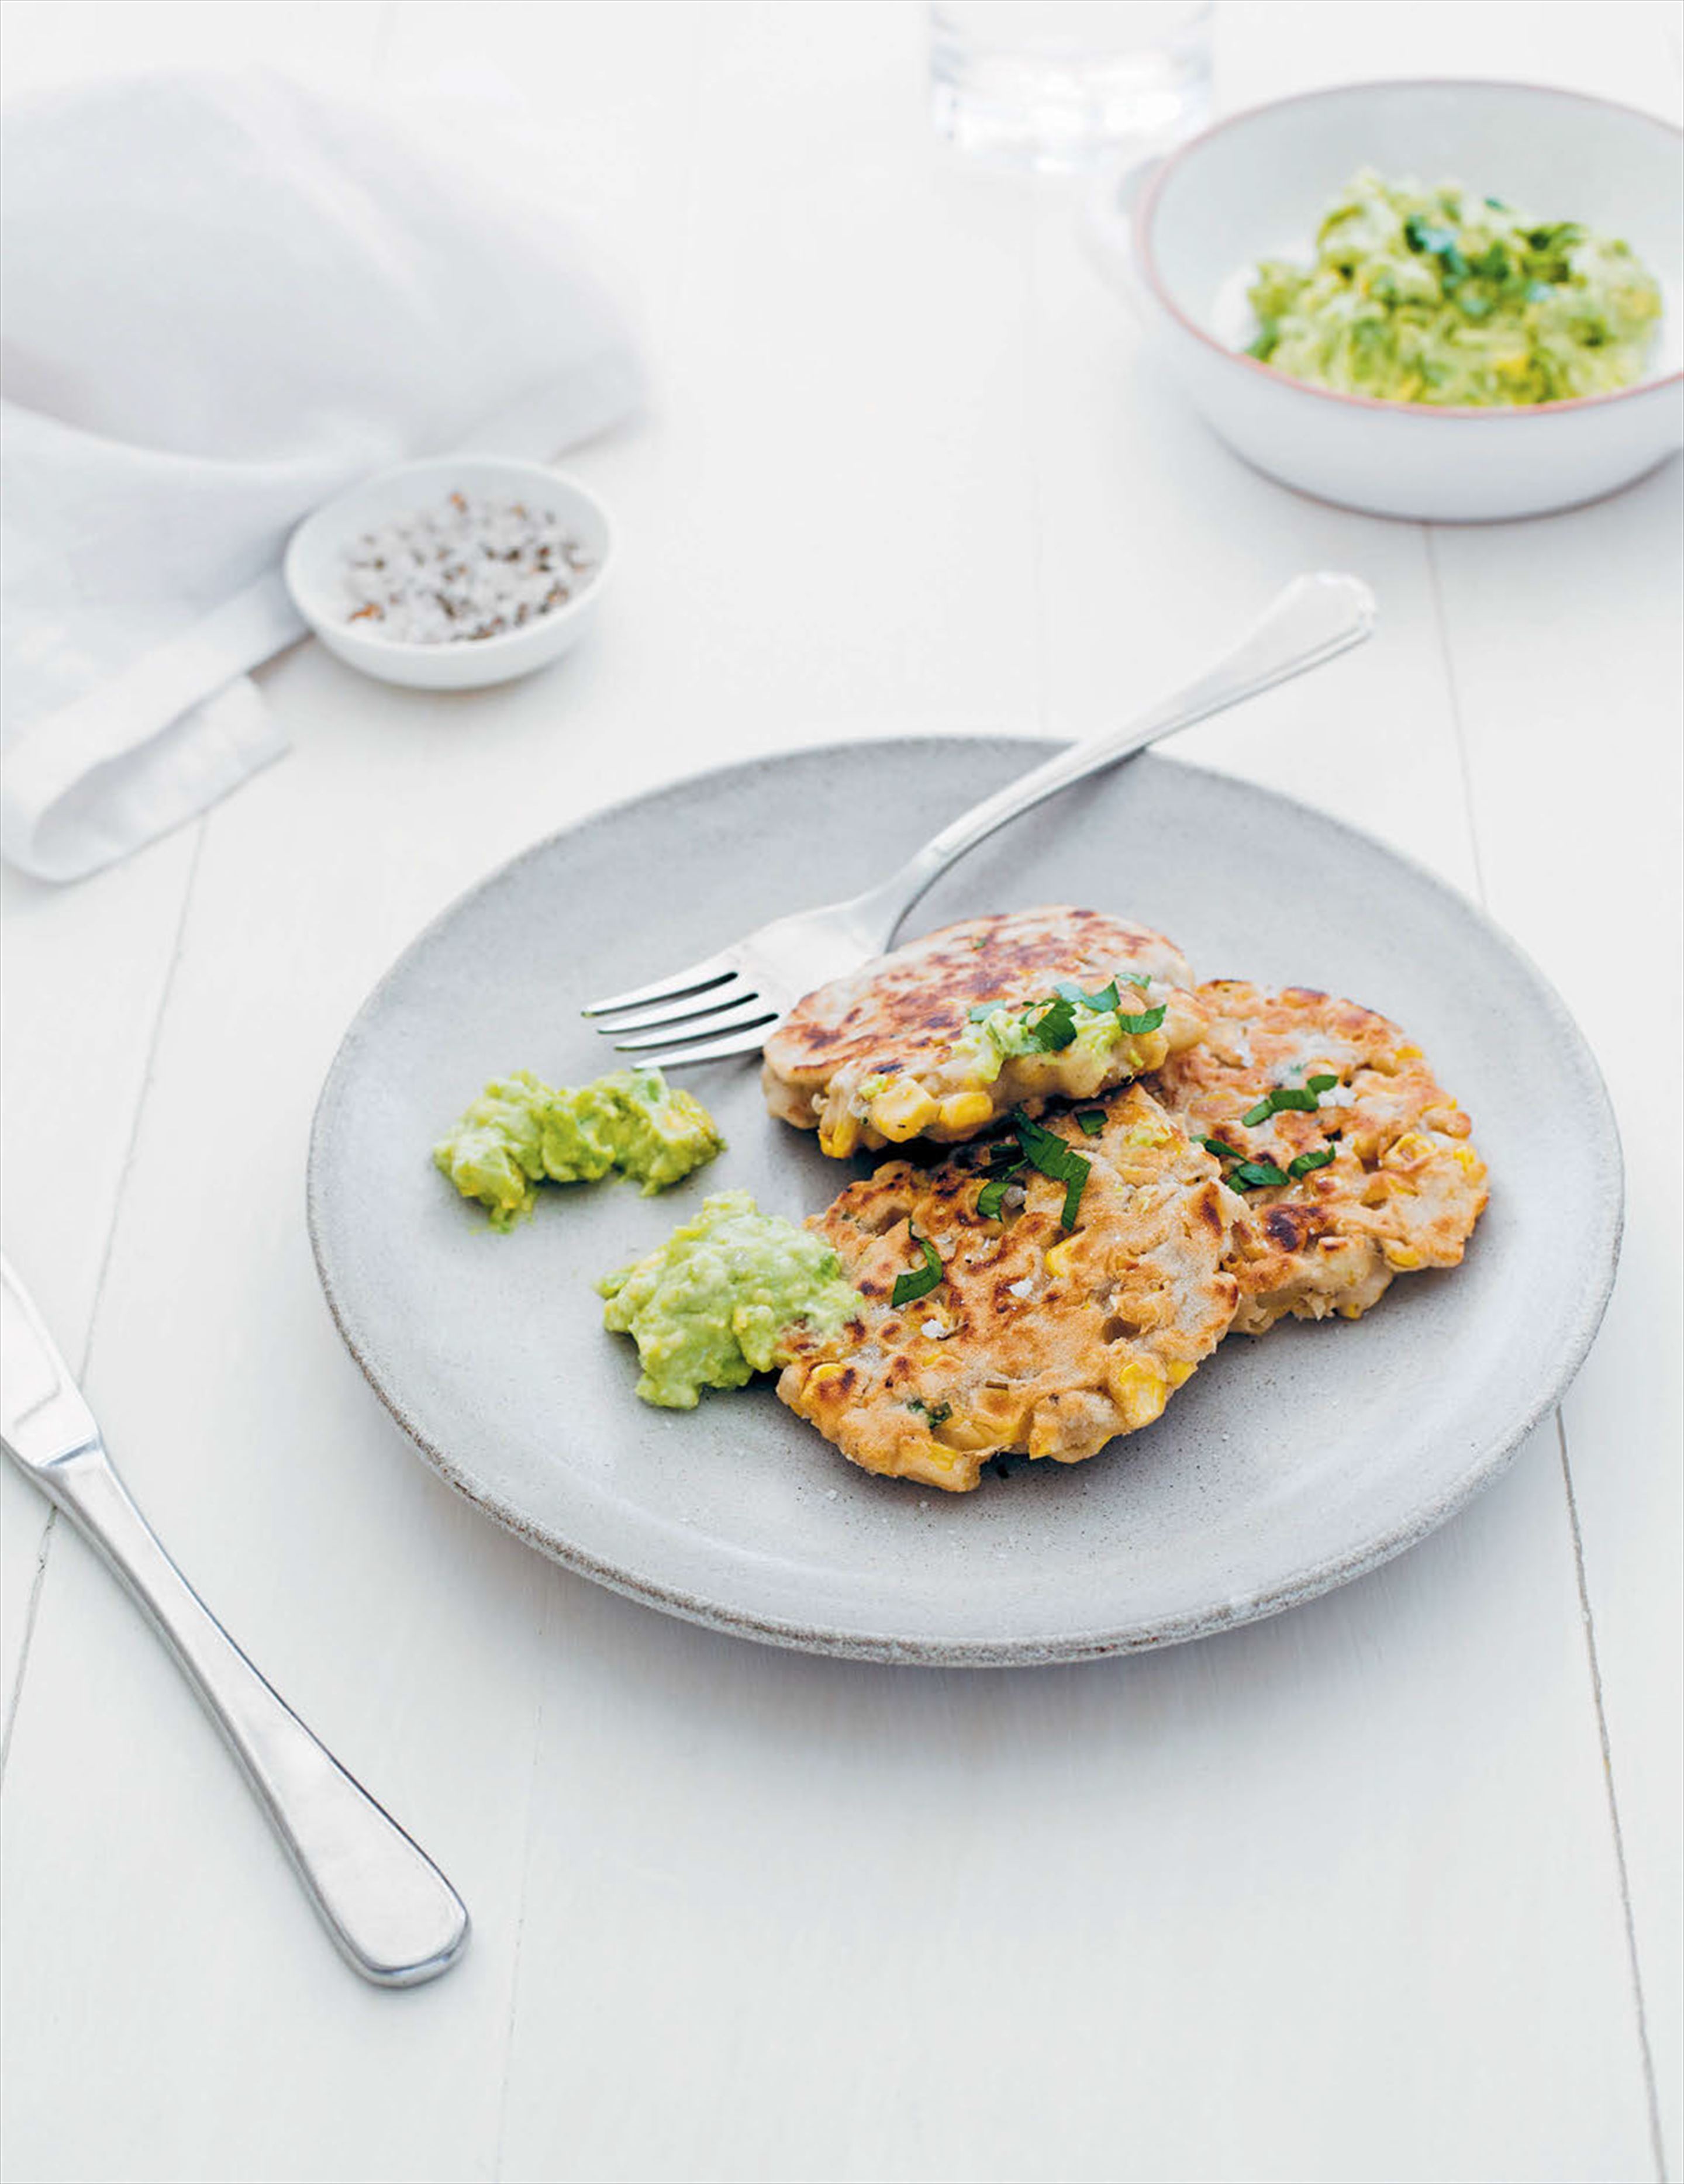 Corn fritters with avocado and ‘goat’s’ cheeses mash